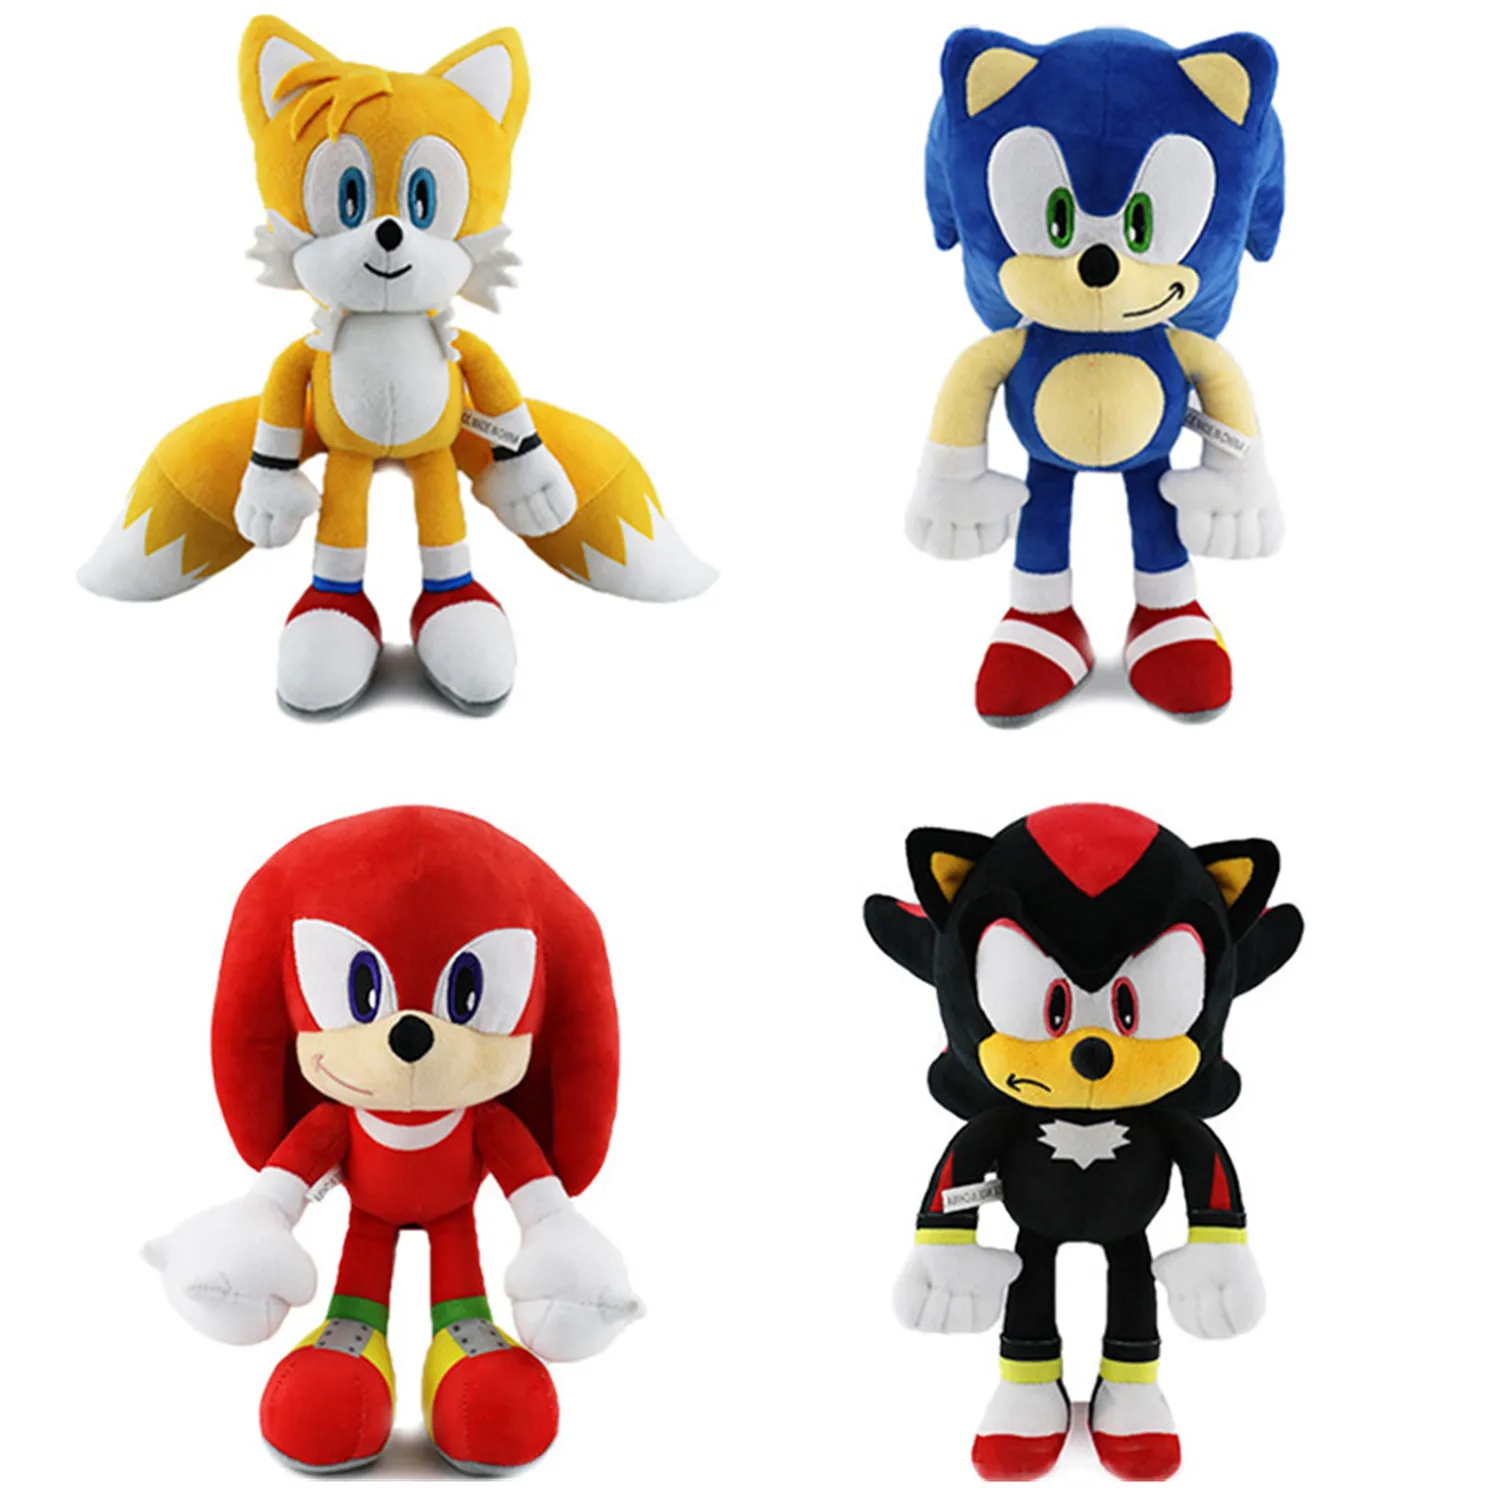 

30cm New Anime Plush Toys Shadow the Hedgehog Knuckles the Echidna Miles Prower Game Stuffed Plush Doll Cartoon Toys Kids Gifts